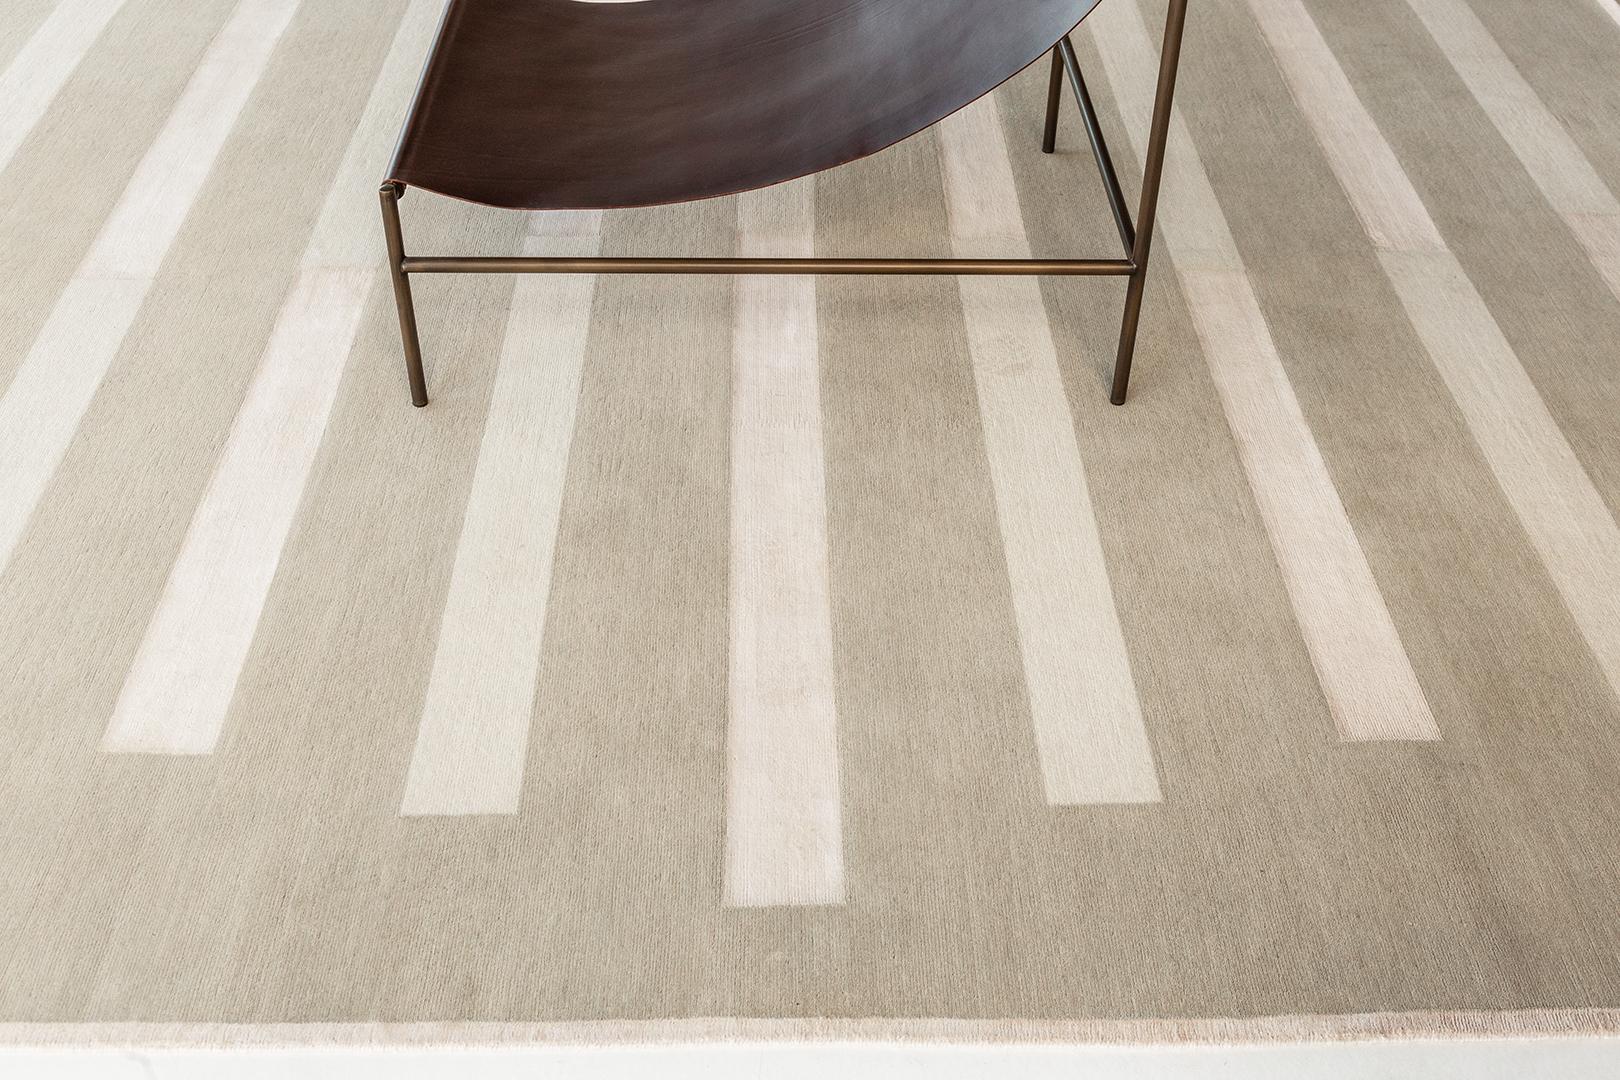 Entrée offers a classic grounding linear pattern, providing structure to any room. Simple transition from wool to silk in a singular line offers visual and tactile texture. Entrée is a study of linear composition and textural exploration.

Erica